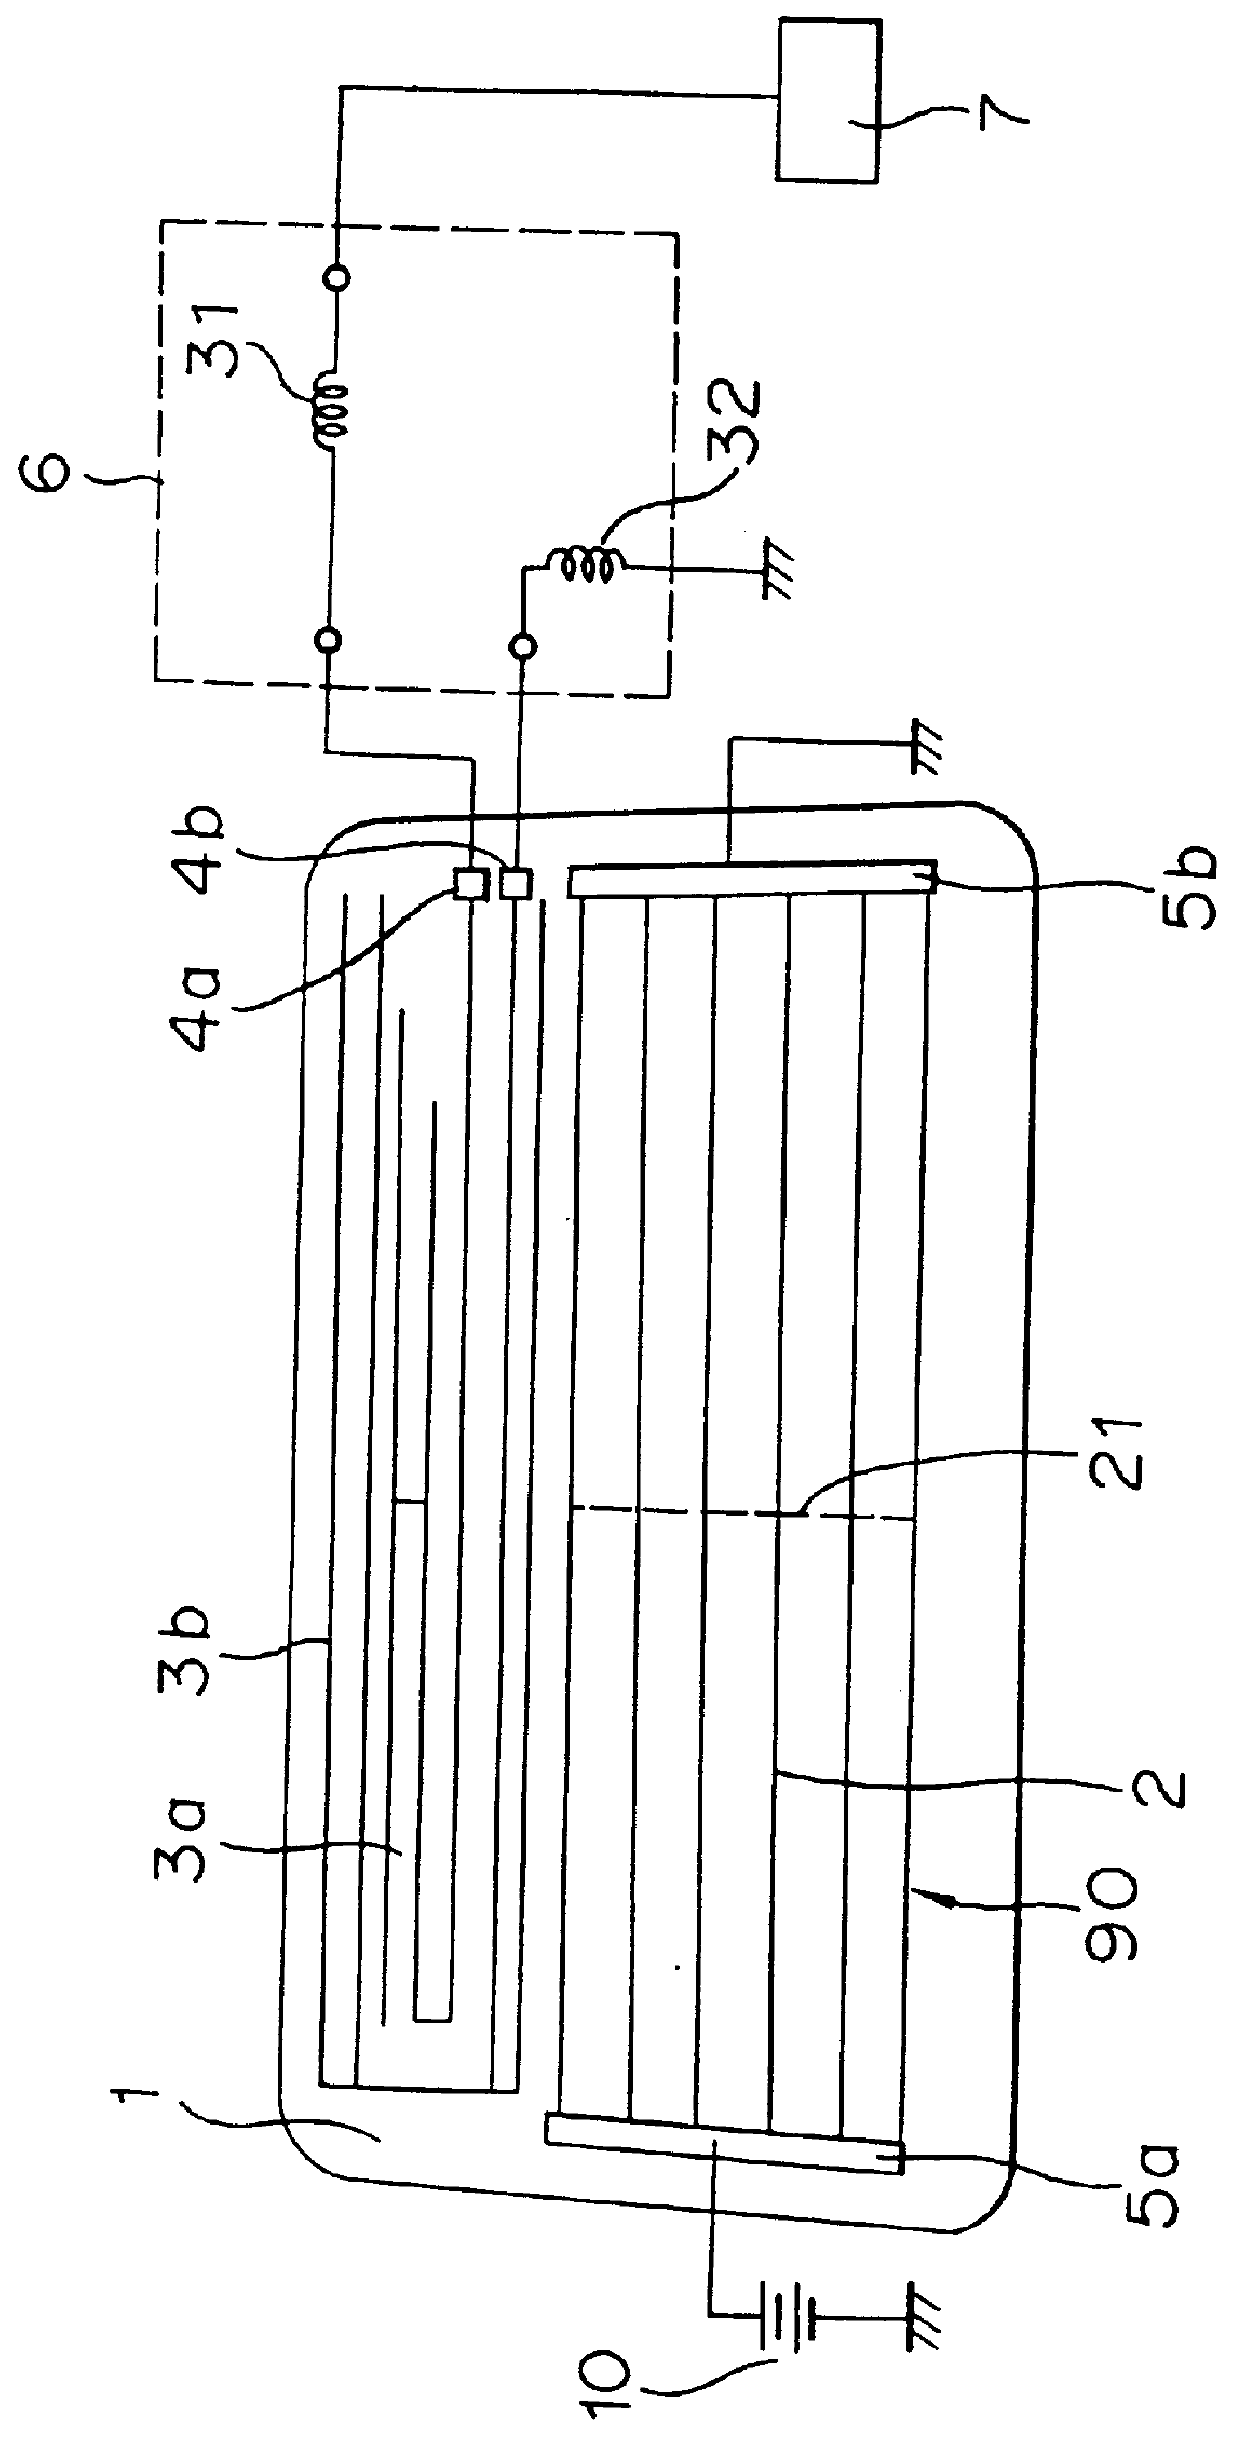 Glass antenna device for an automobile